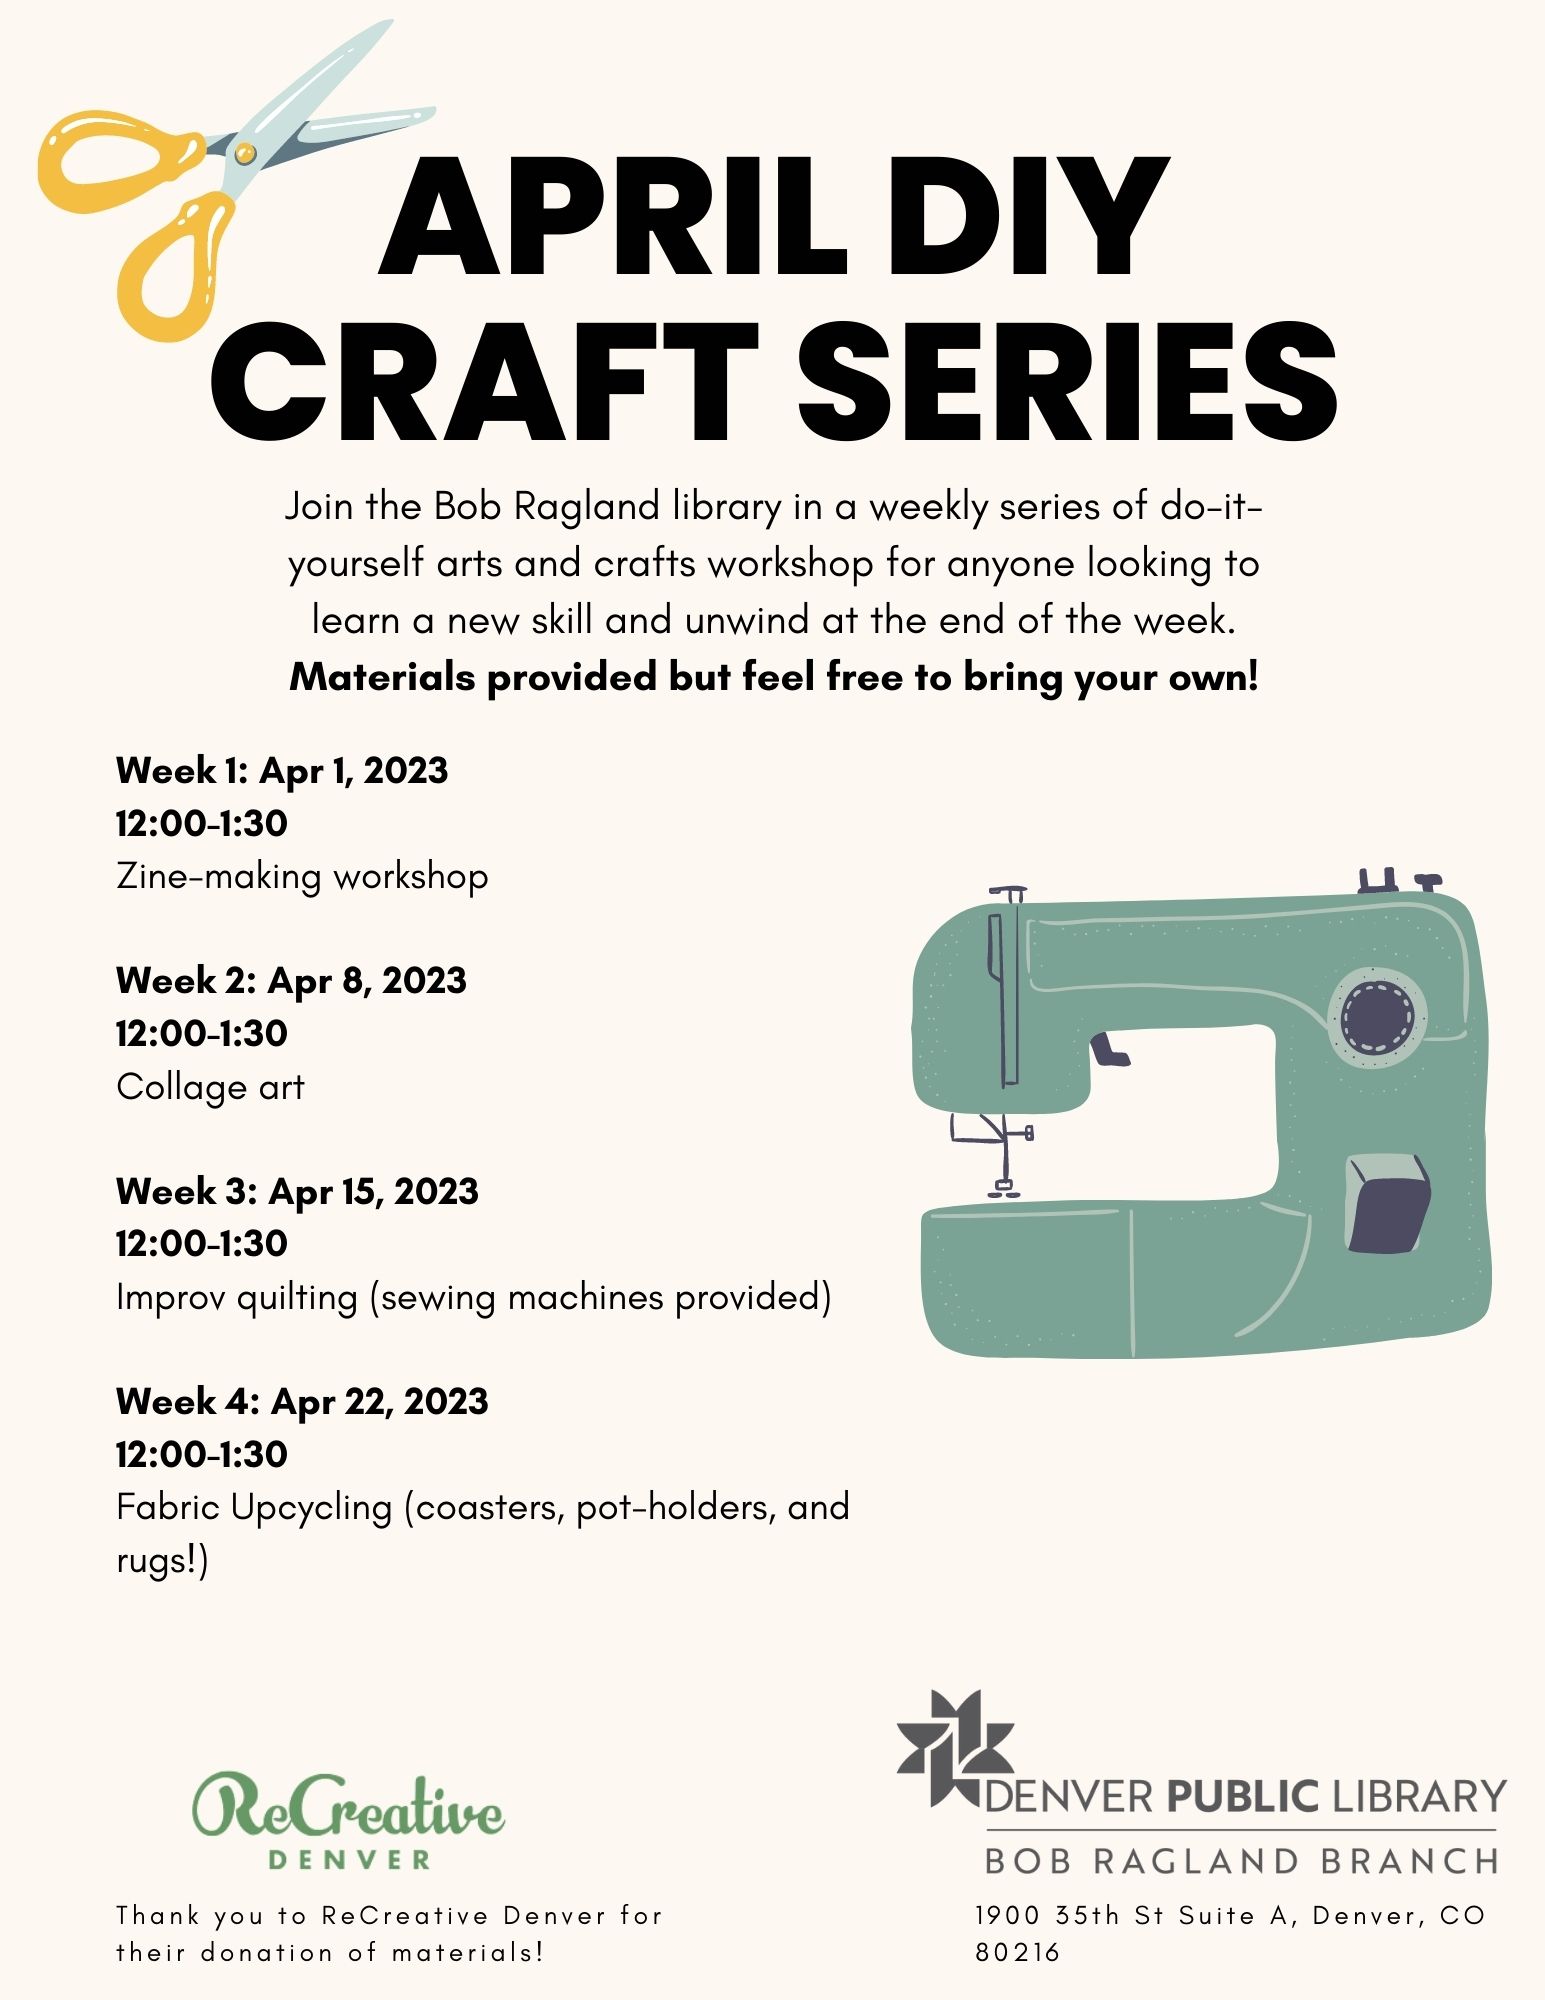 Big bold letters read APRIL DIY CRAFT SERIES. There is a cartoon image of yellow scissors and a green sewing machine on the flyer over a light yellow background.